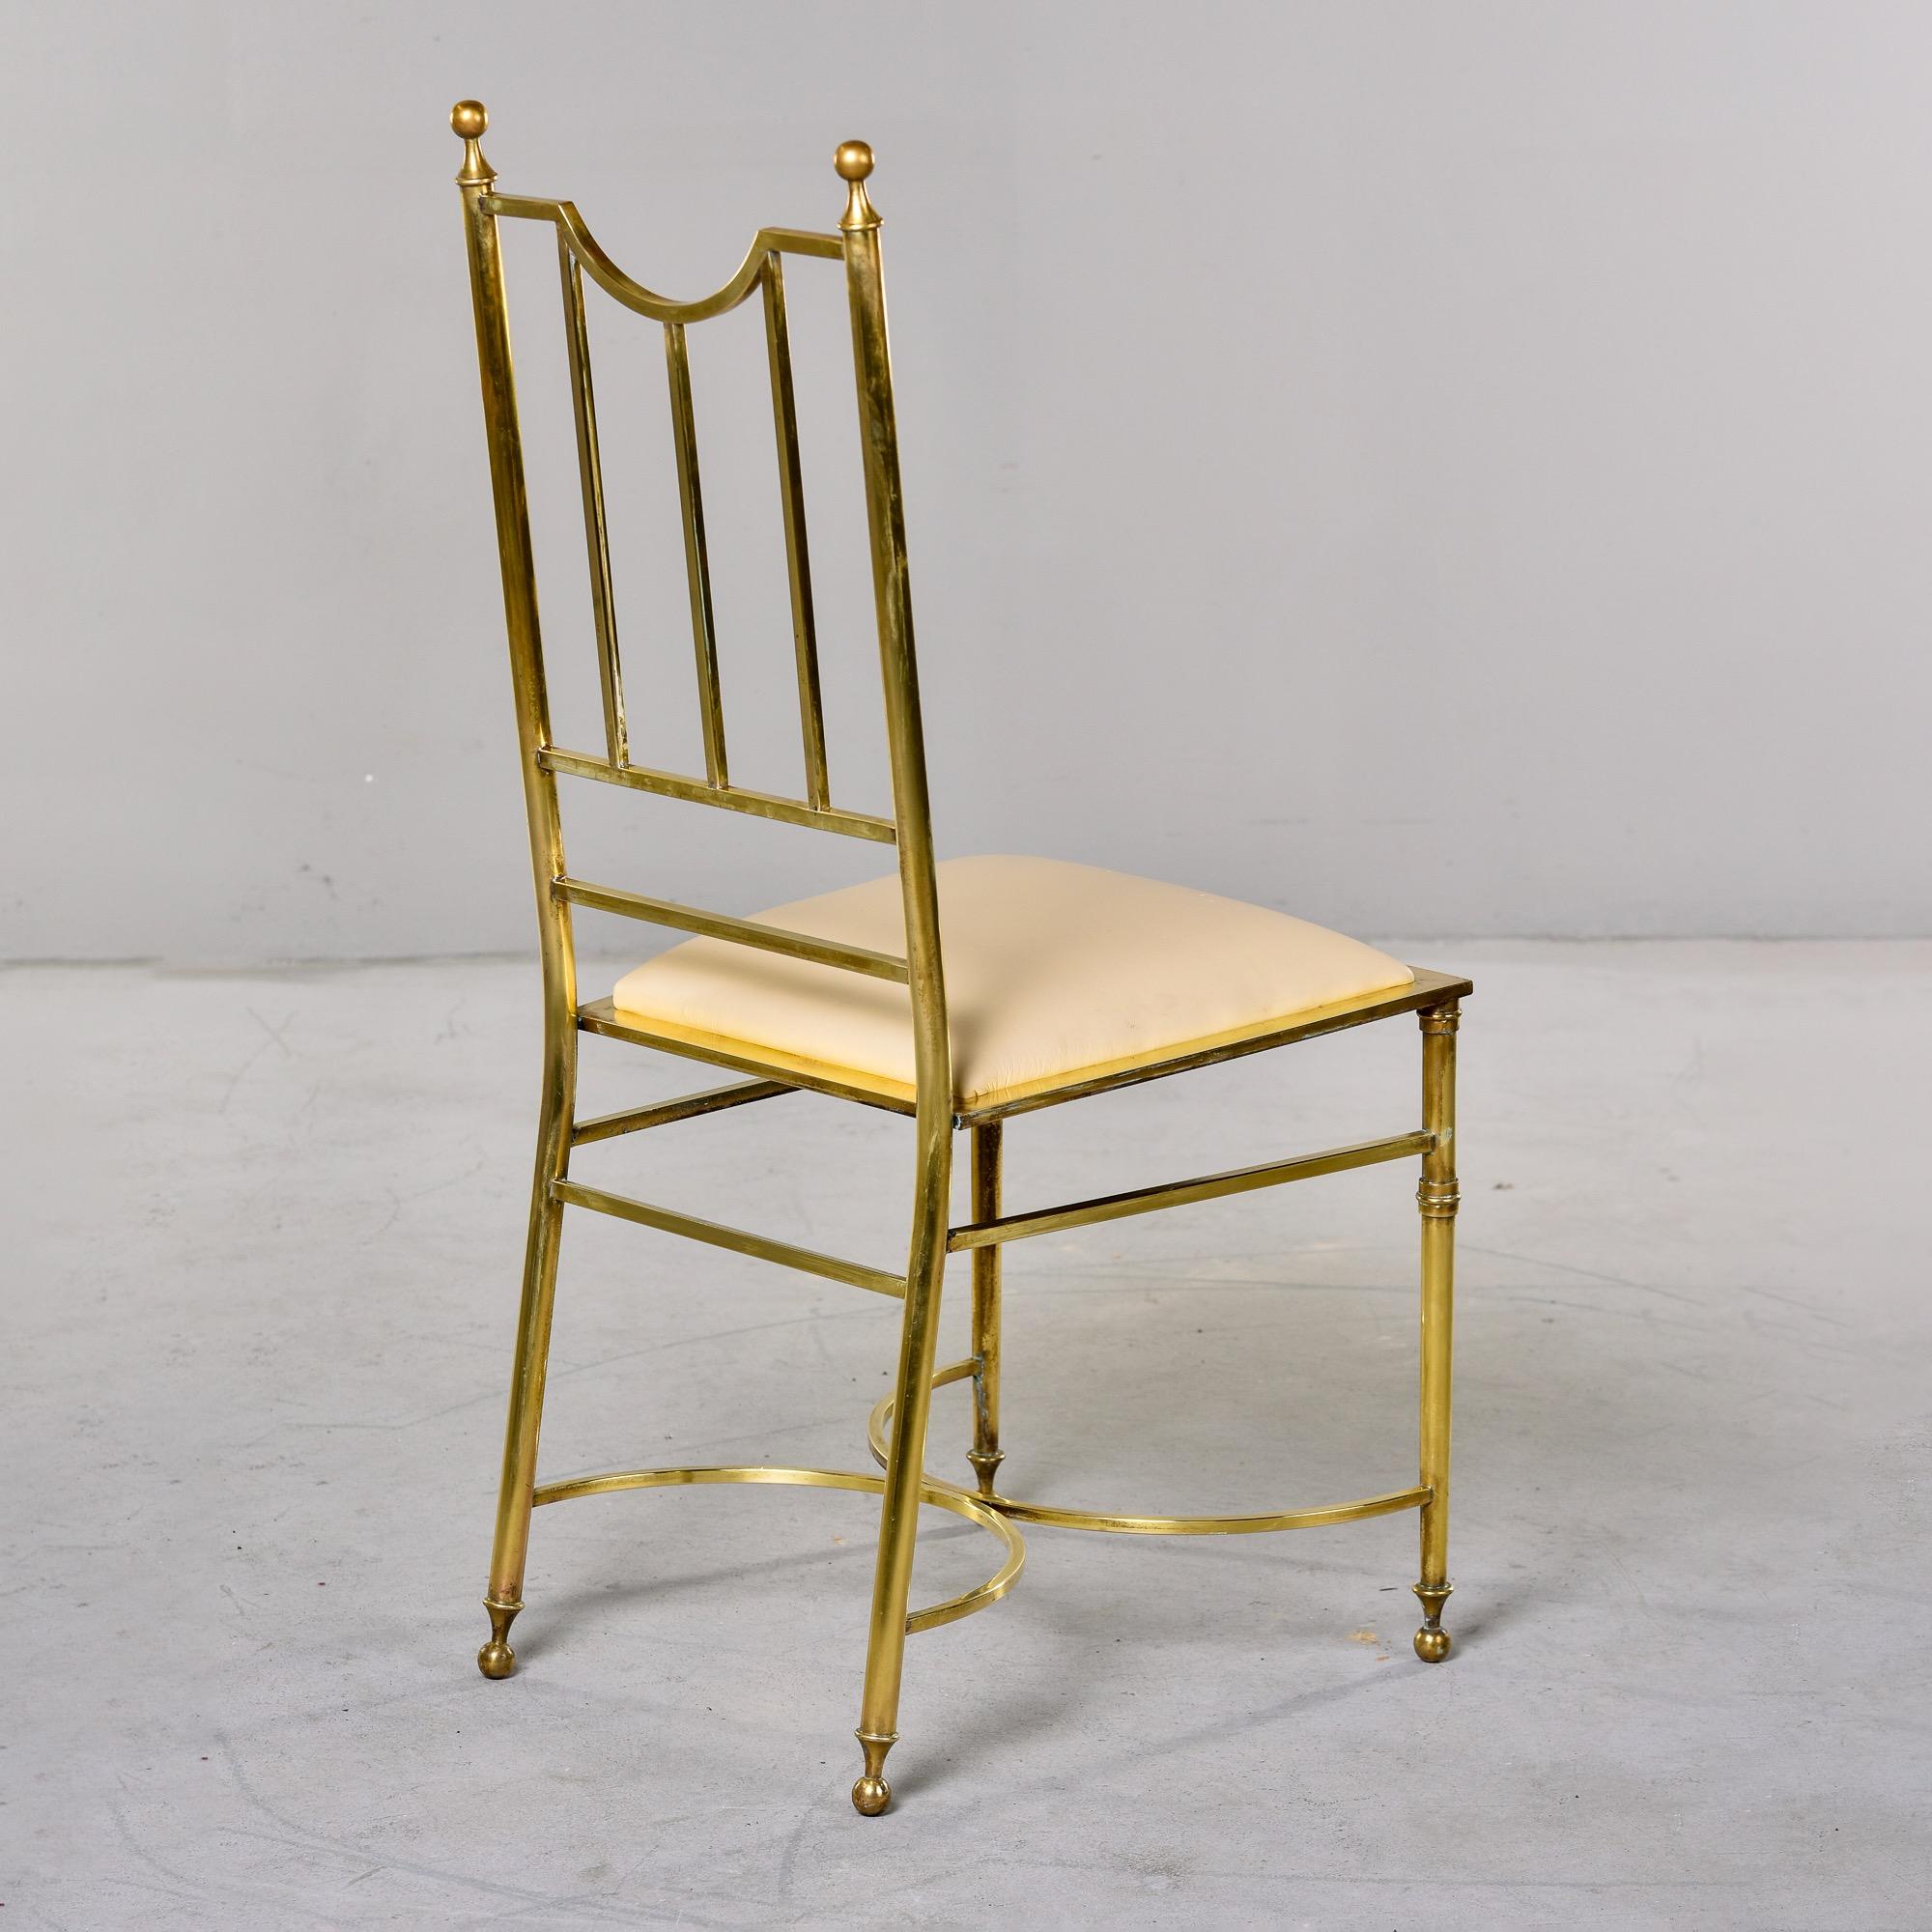 20th Century 1930s Brass Frame Chair with Leather Seat